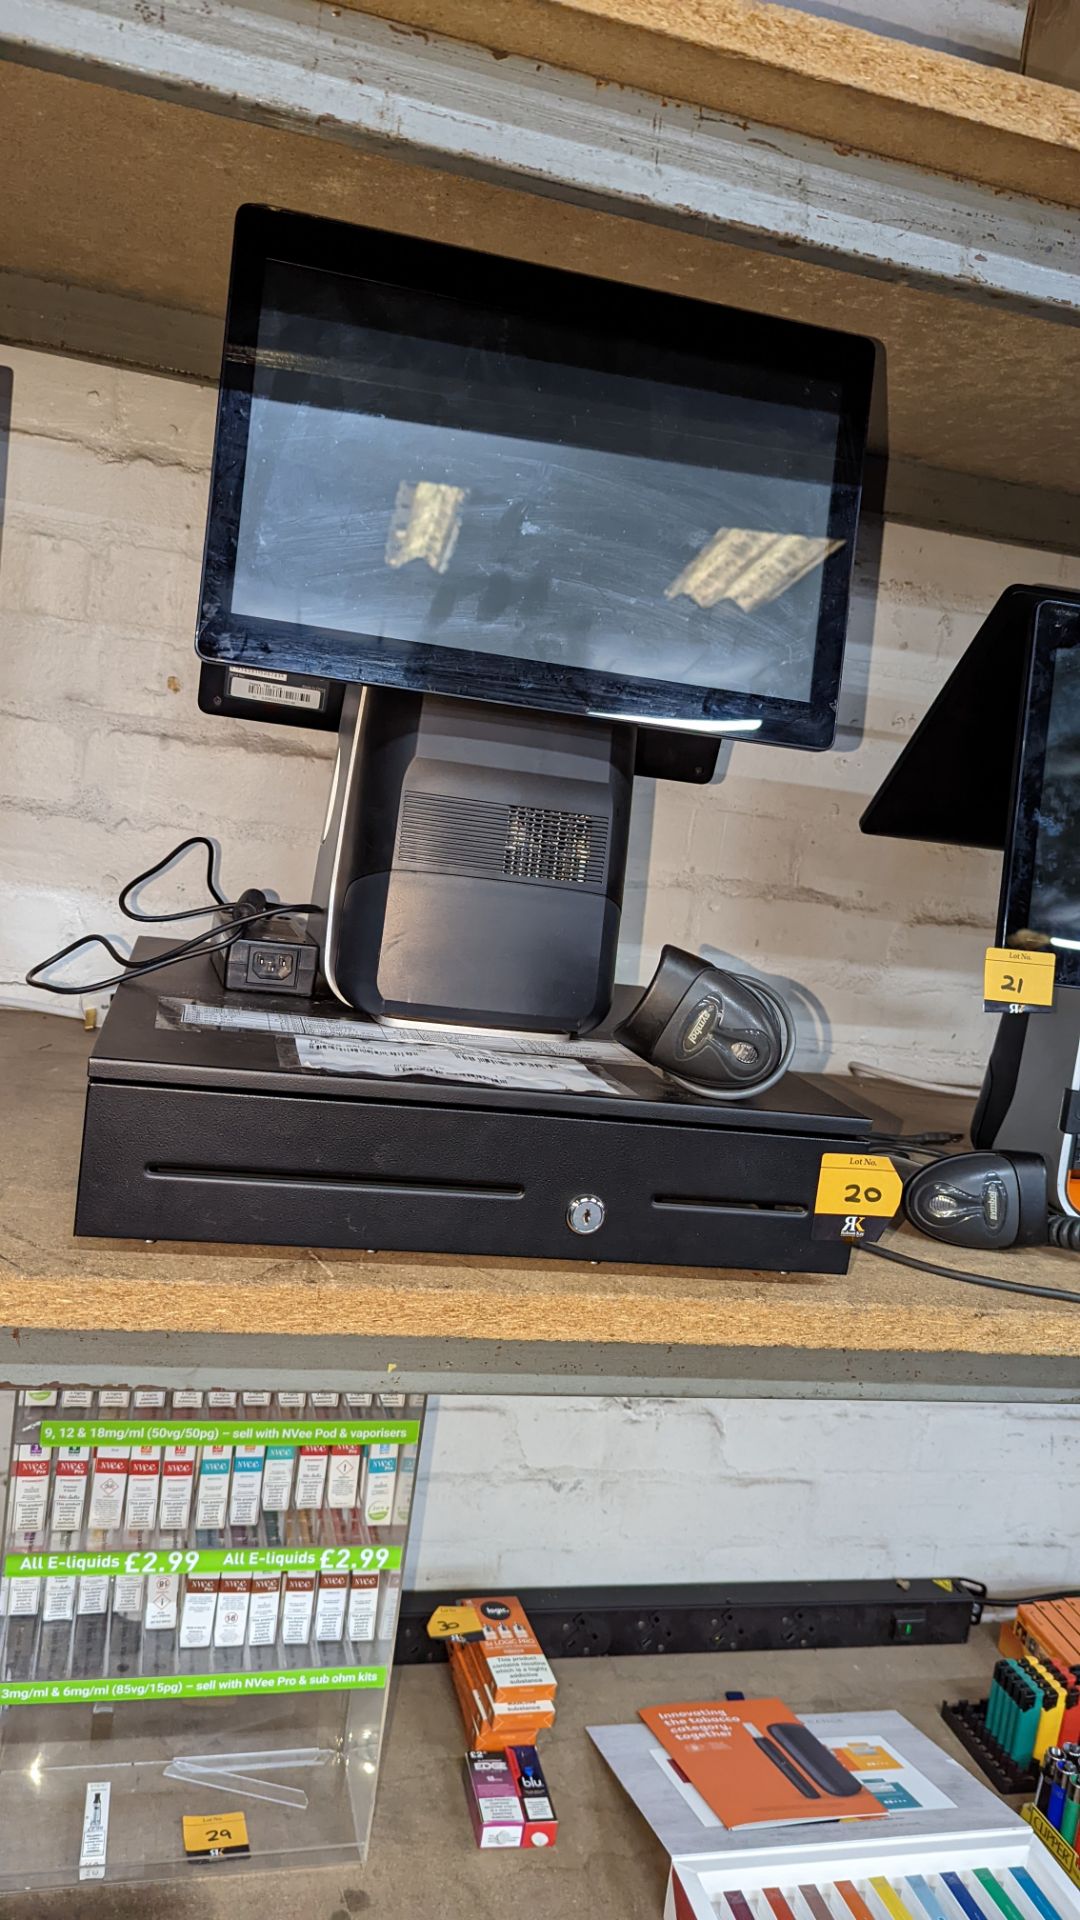 Inpos-T80 Plus model L15Q4 EPOS terminal with twin screens plus cash drawer & hand-held barcode scan - Image 4 of 9